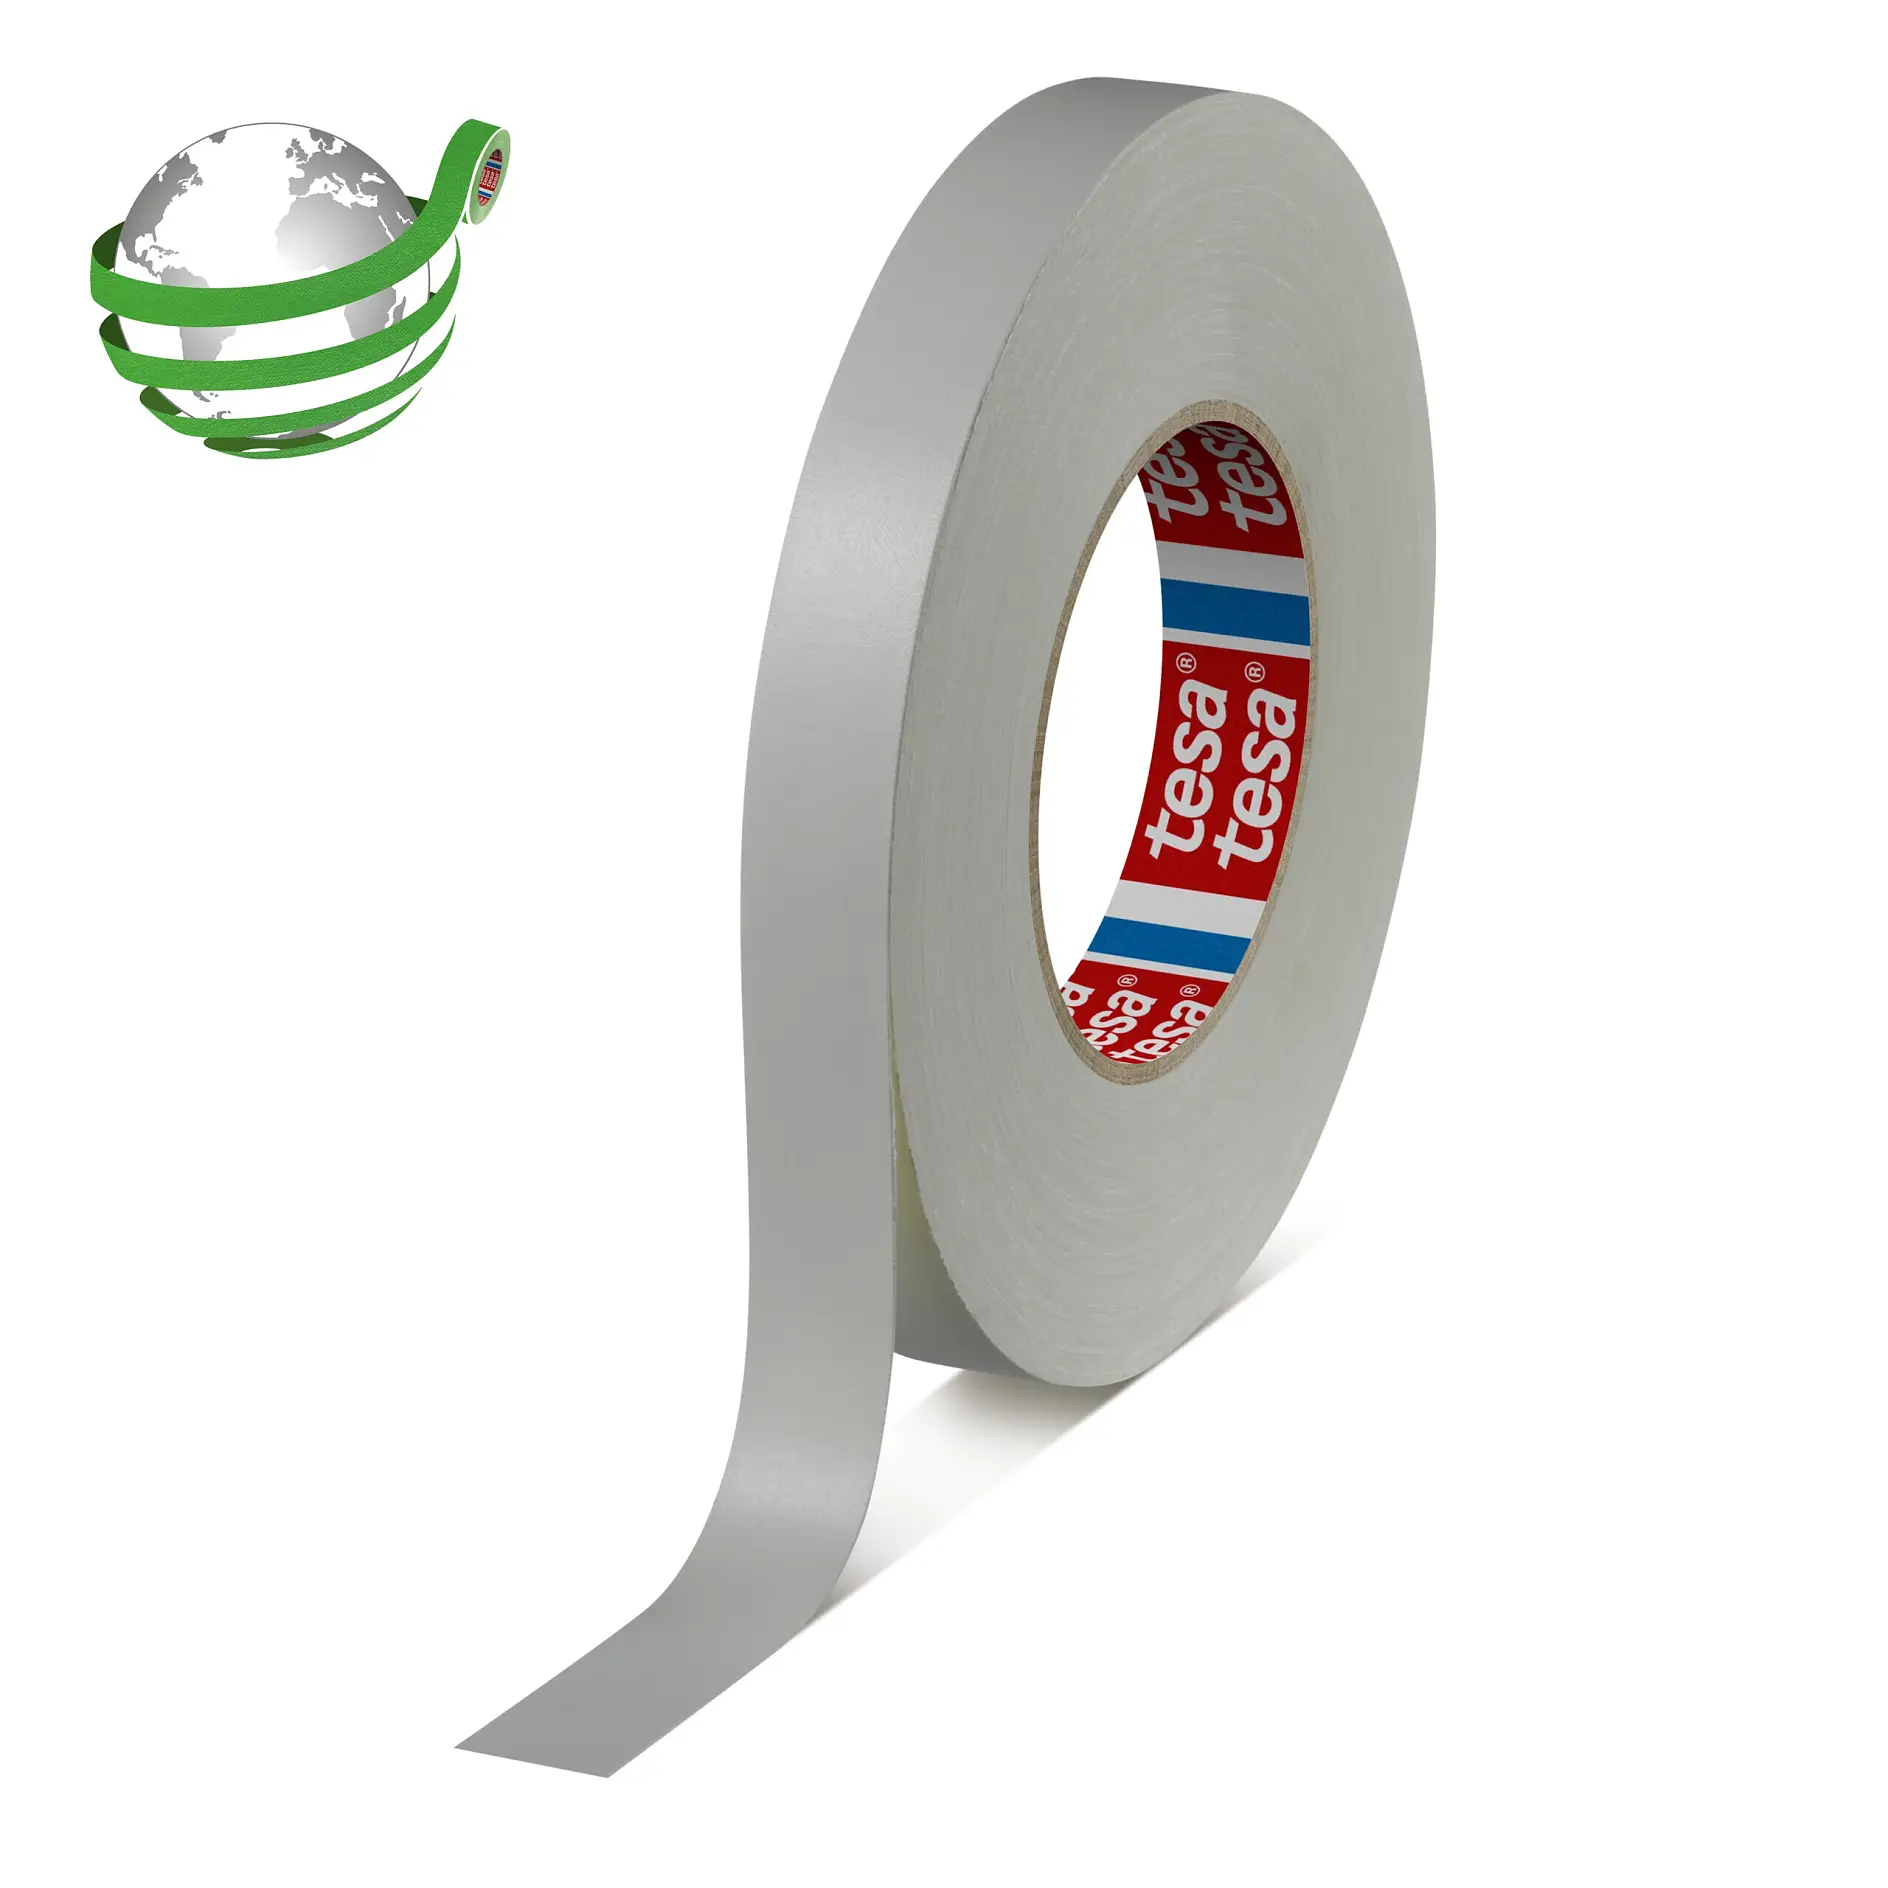 tesa-4660-printable-acrylic-coated-cloth-tape-white-046600009500-pr-with-marker